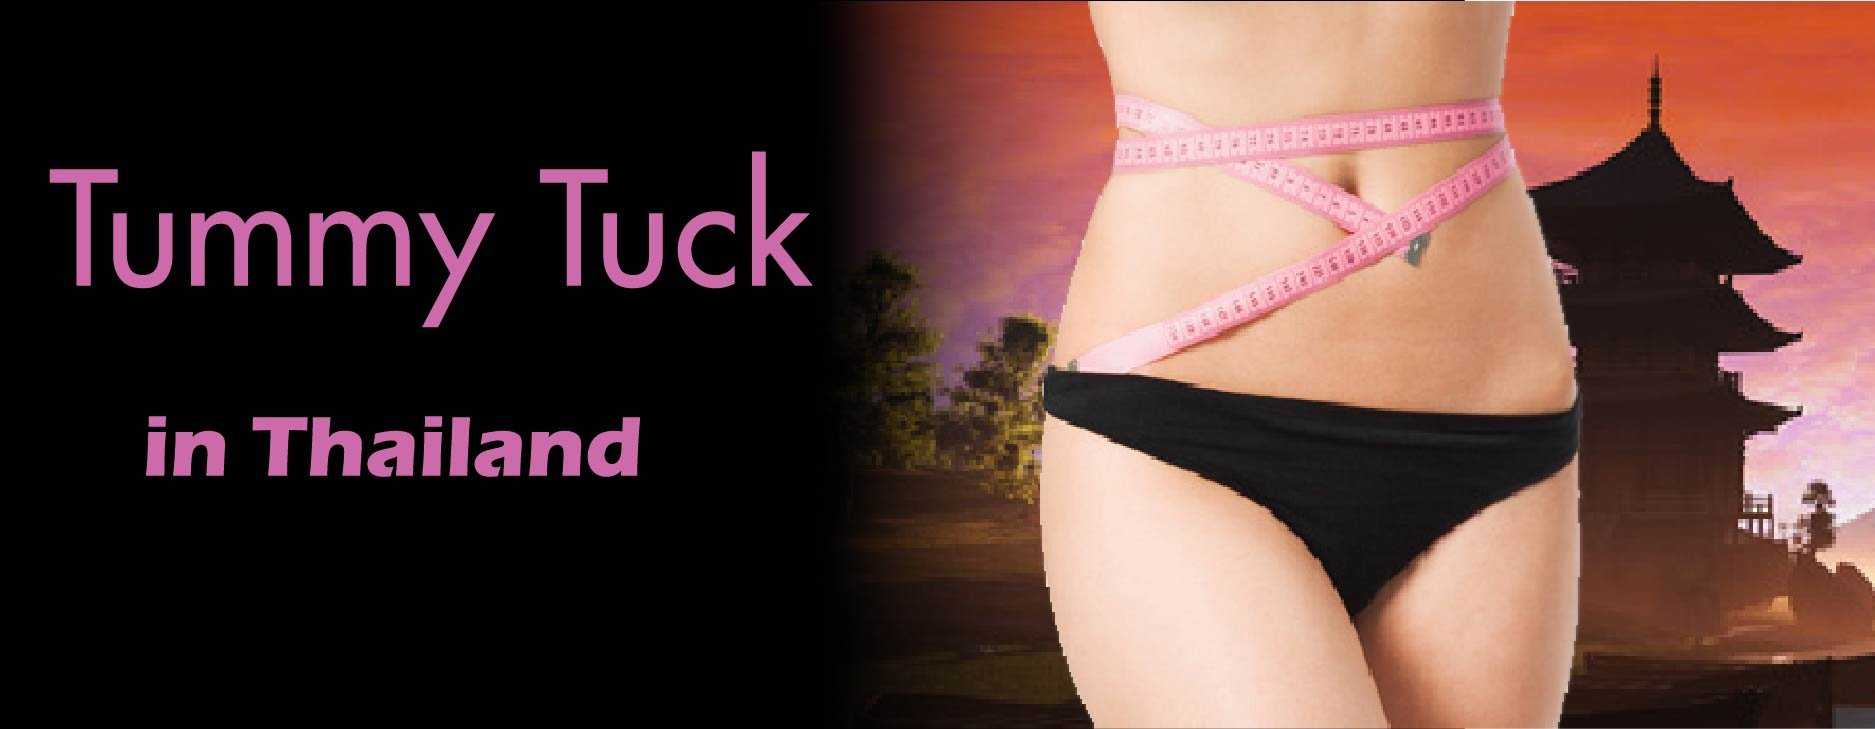 Tummy Tuck in Thailand, Affordable Plastic Surgery Clinic